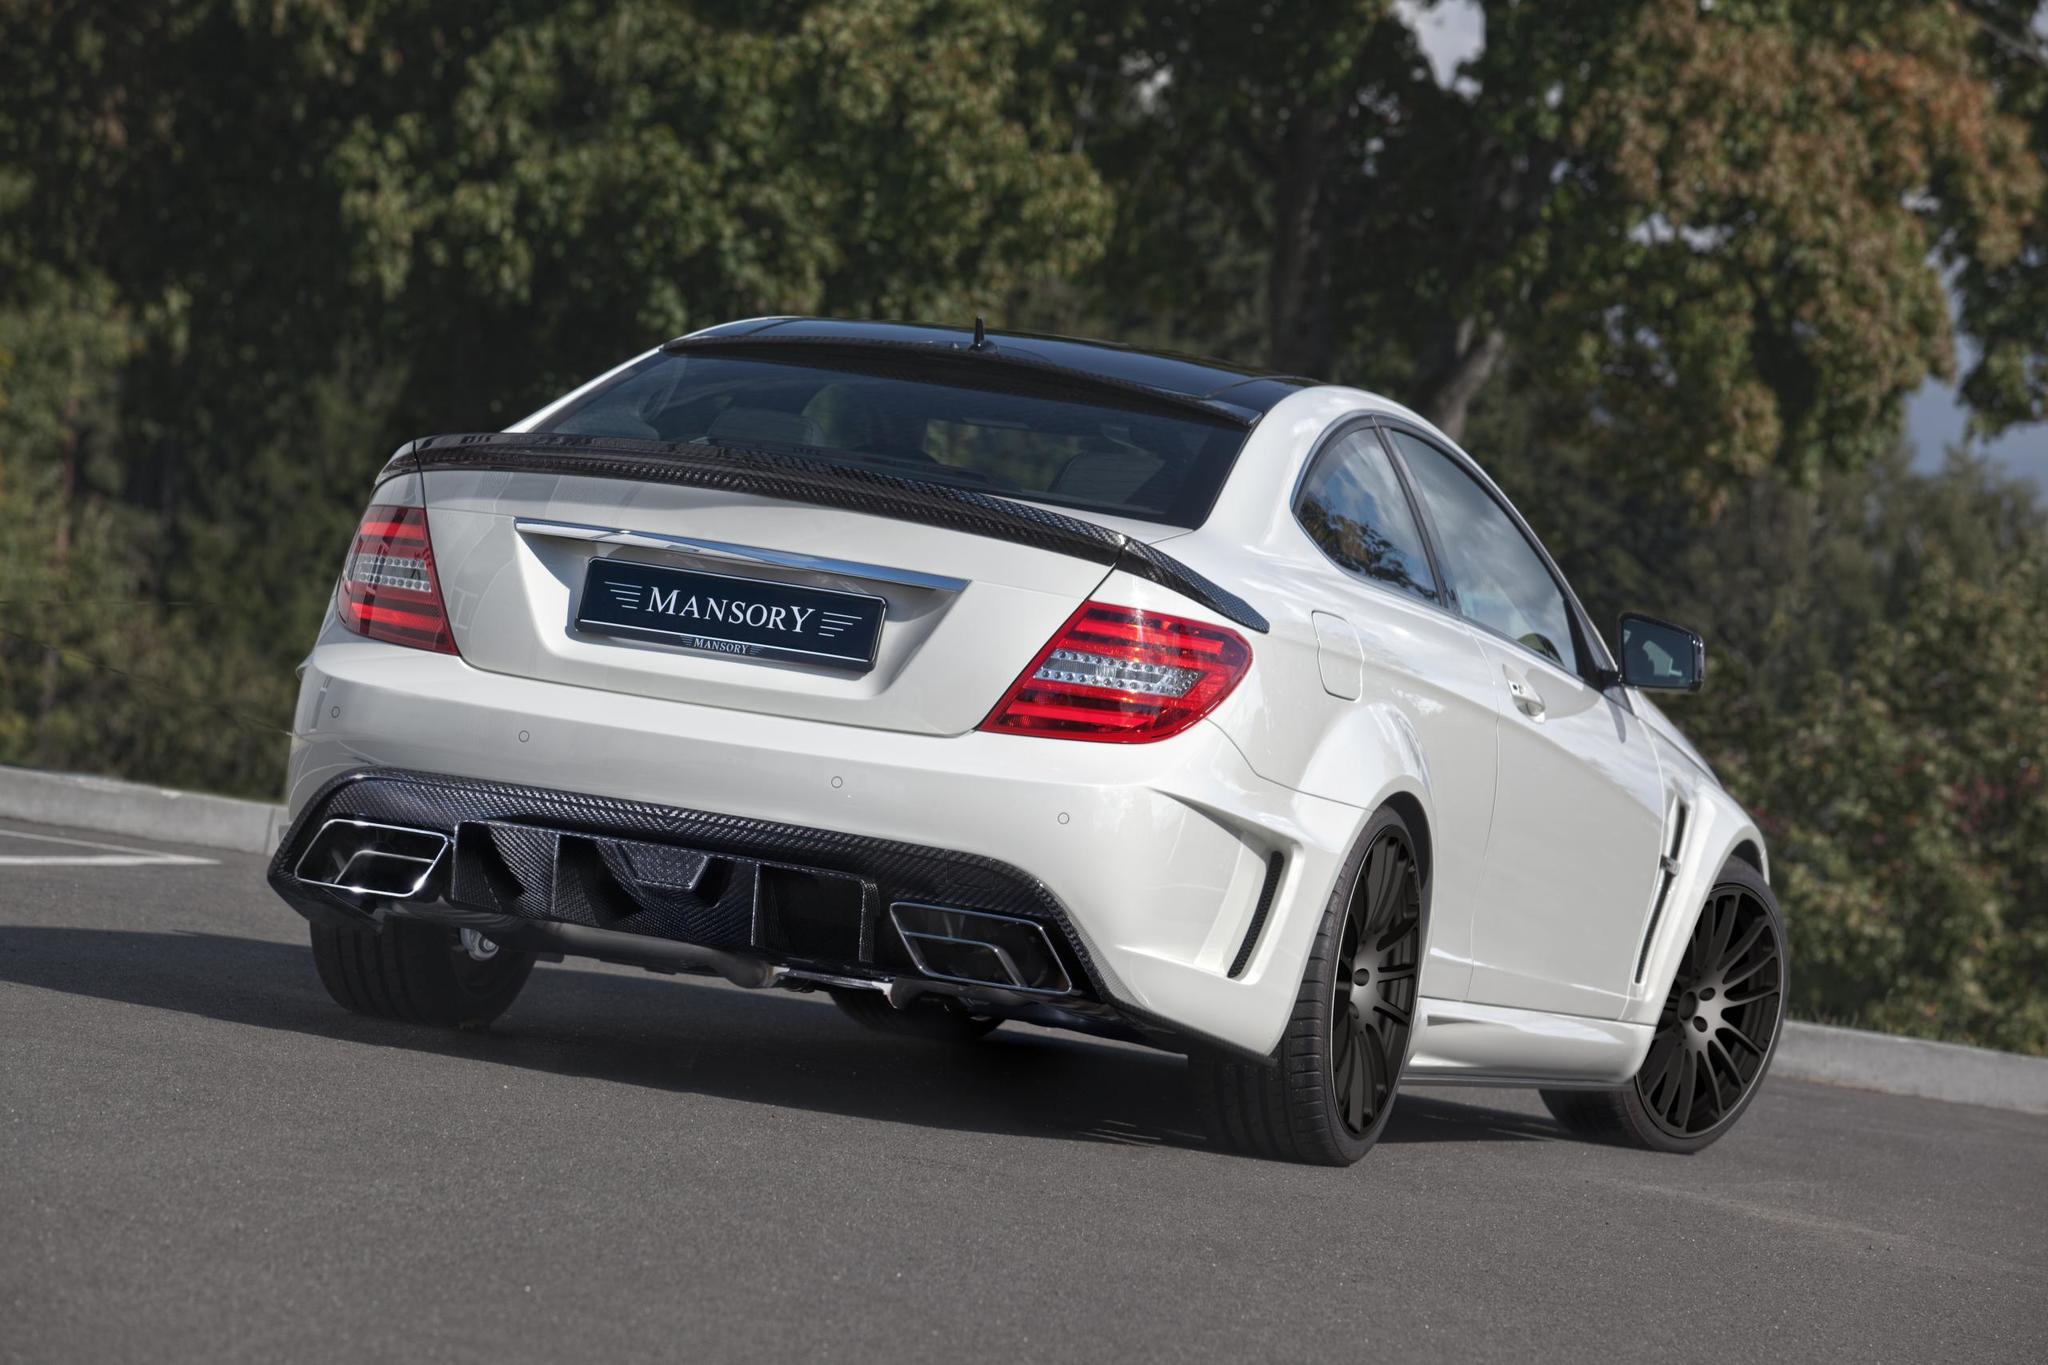 Mansory body kit for Mercedes-Benz C-class carbon